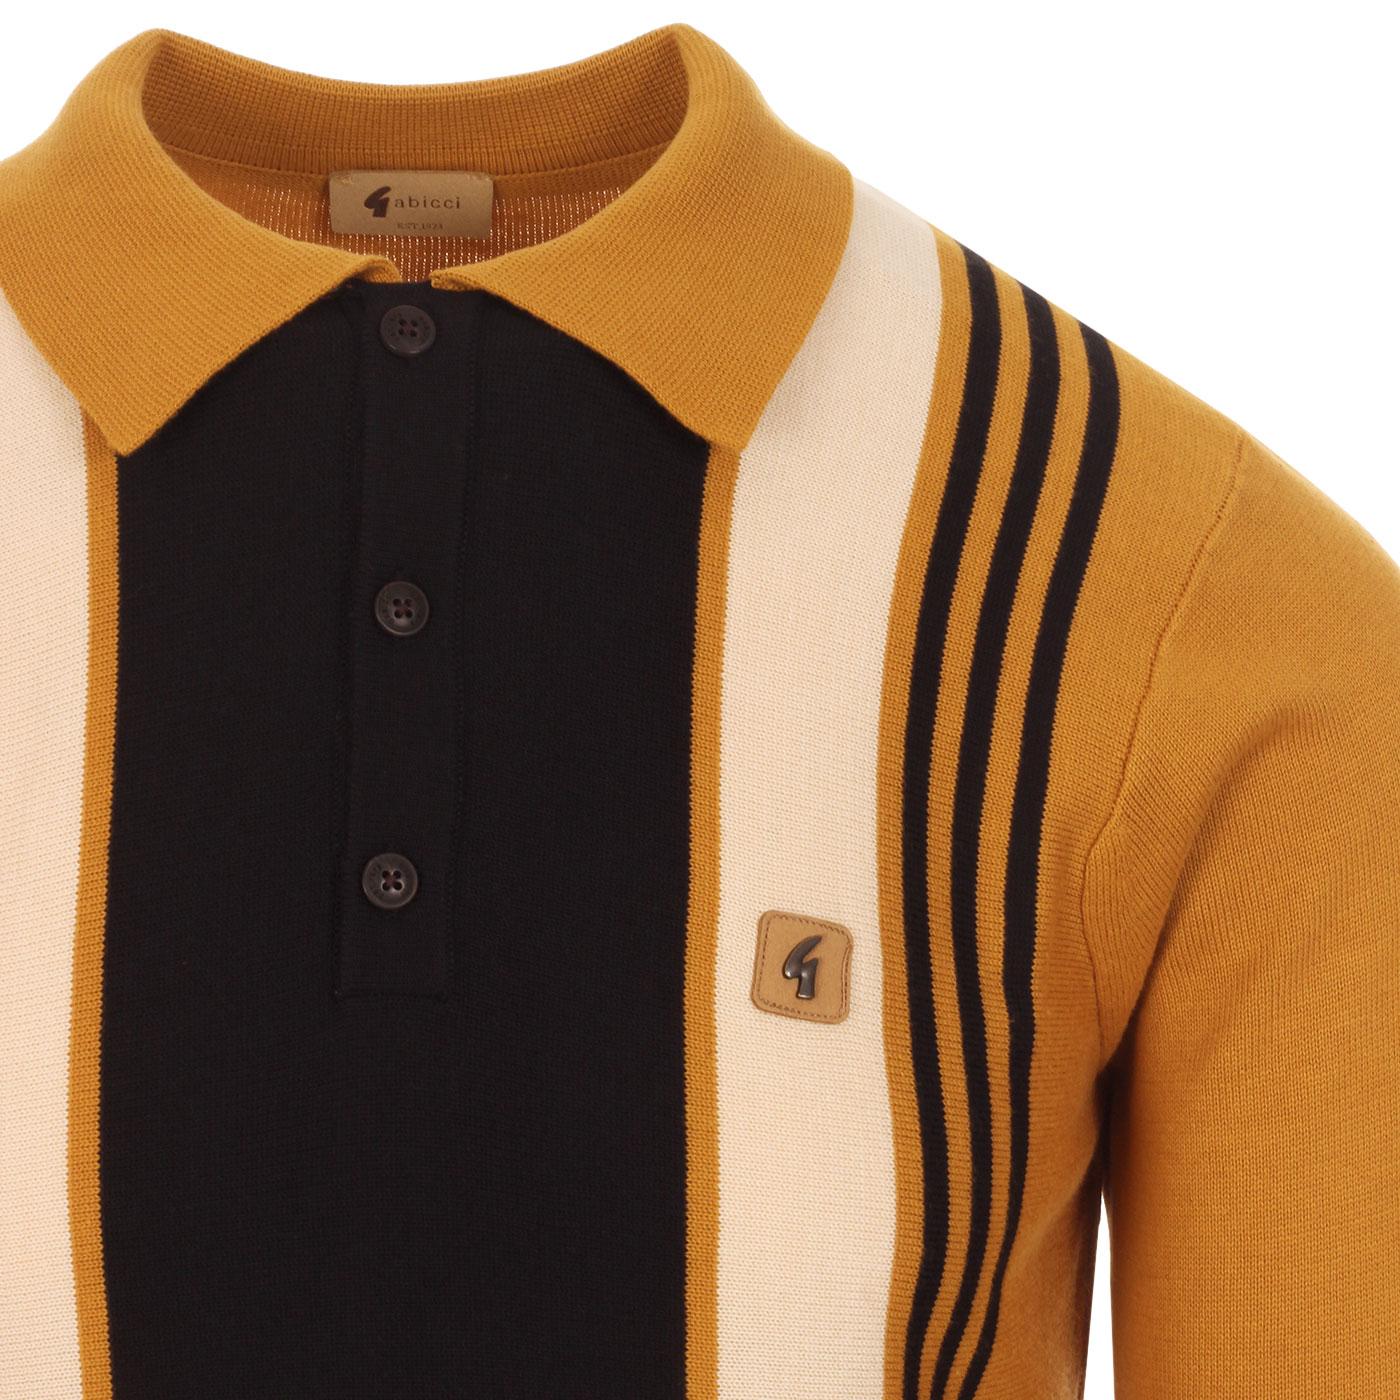 GABICCI VINTAGE 'Searle' 60's Knitted Stripe Polo in Harvest